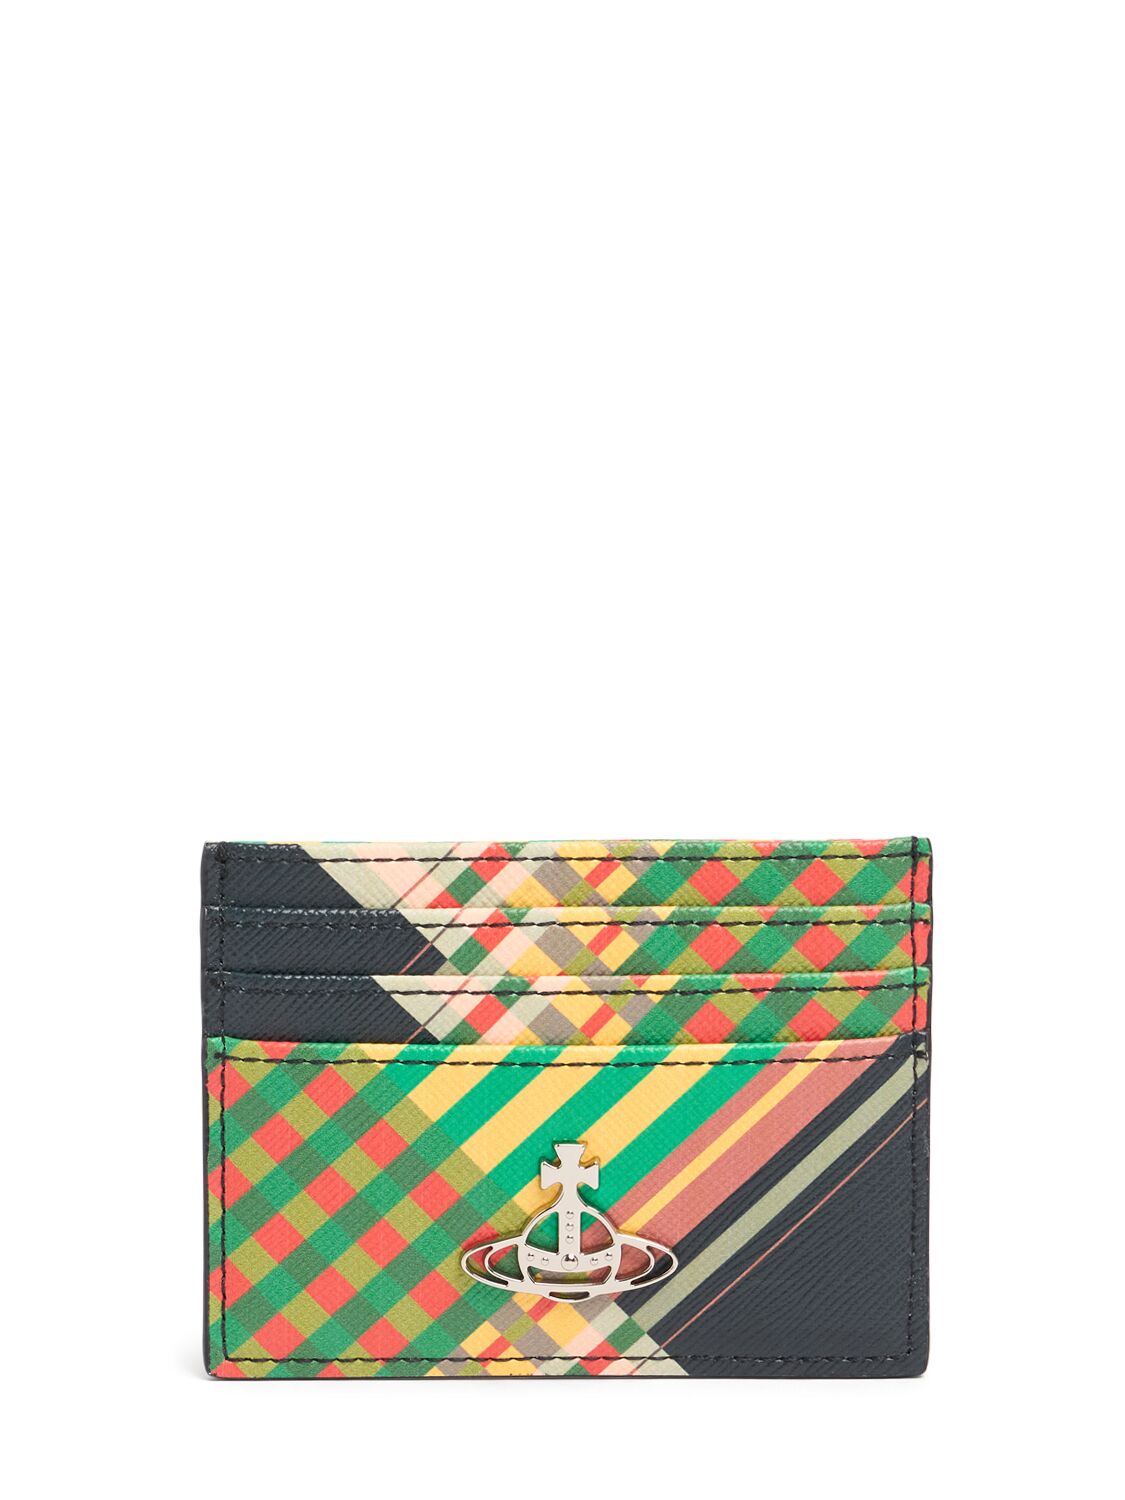 Vivienne Westwood Saffiano Printed Card Holder In Multi